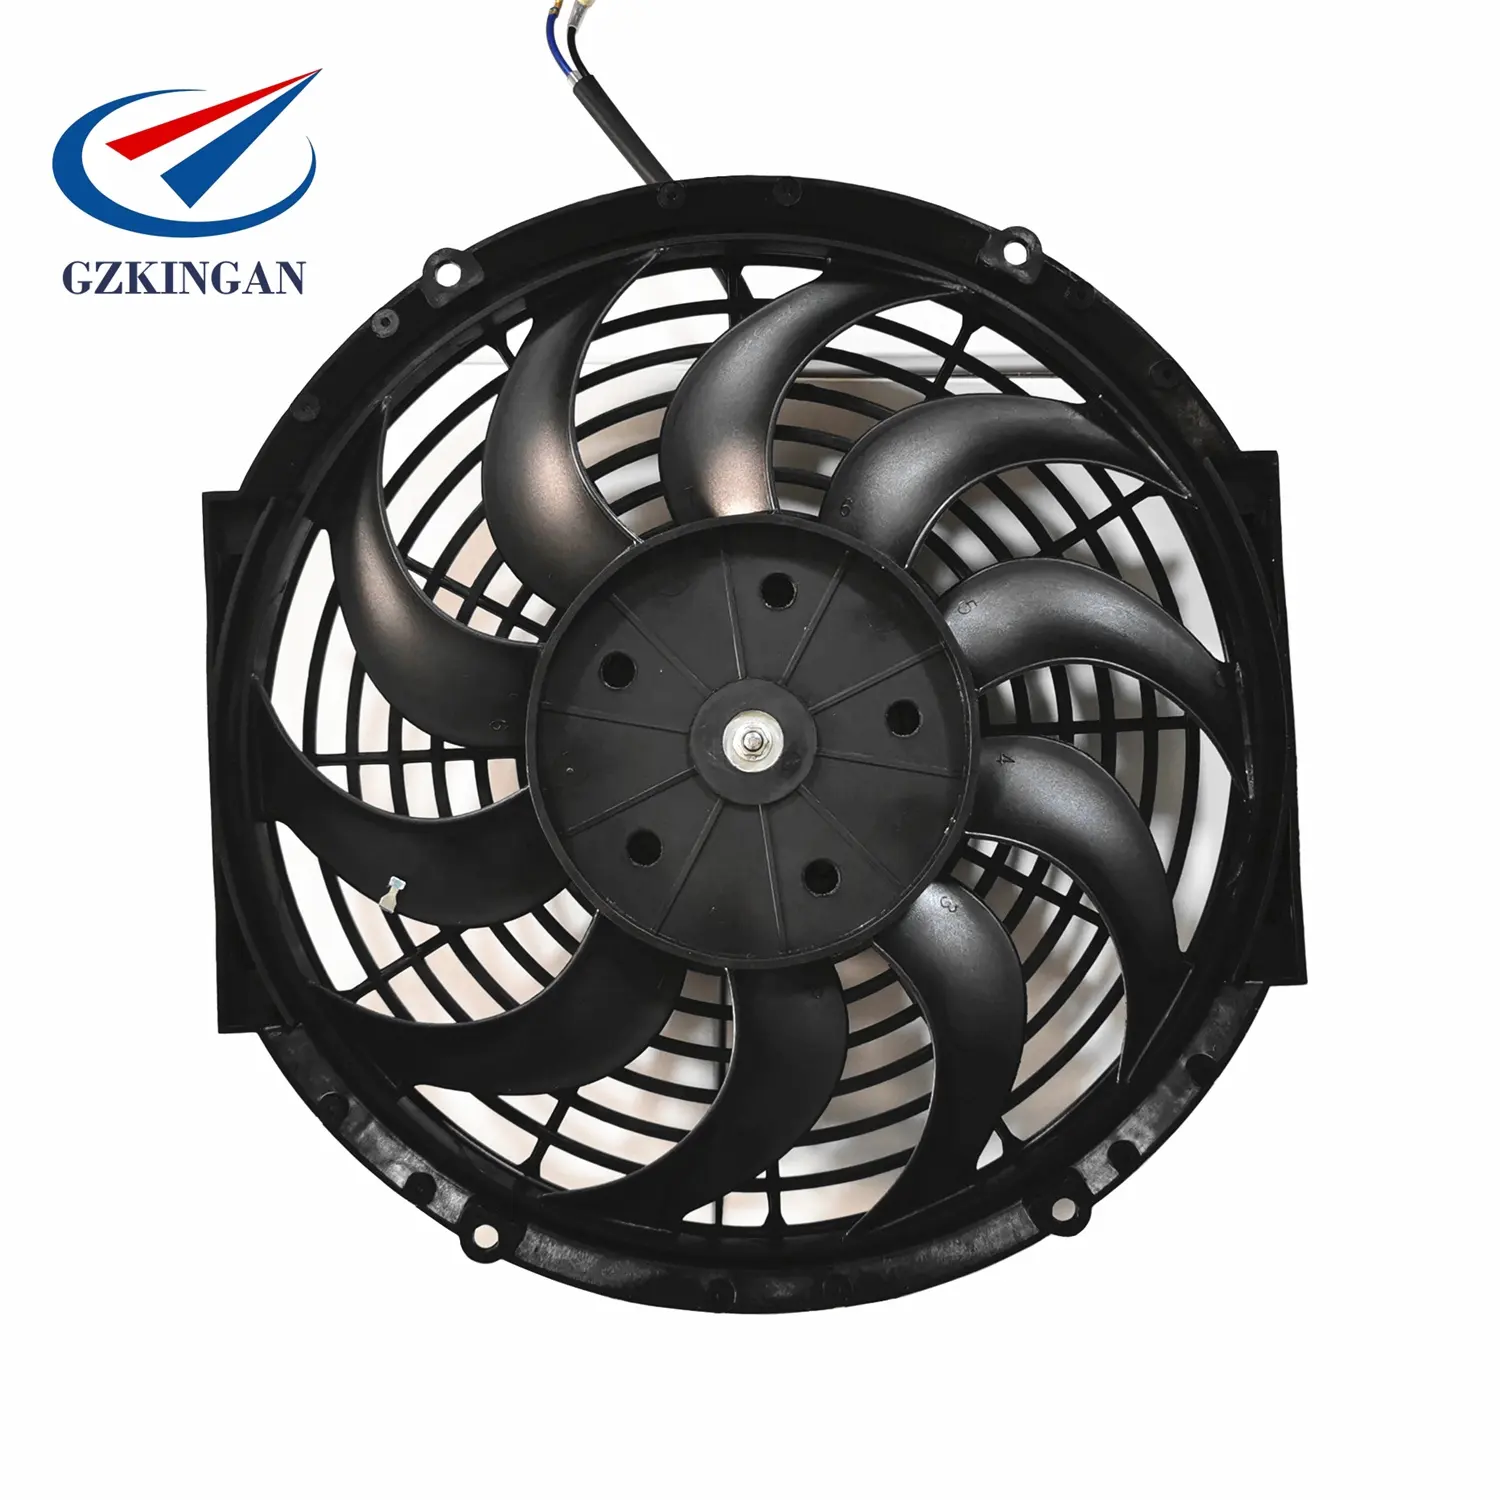 12 inch auto radiator universal fan for bus/truck cooling system 12V and 24V condenser fan